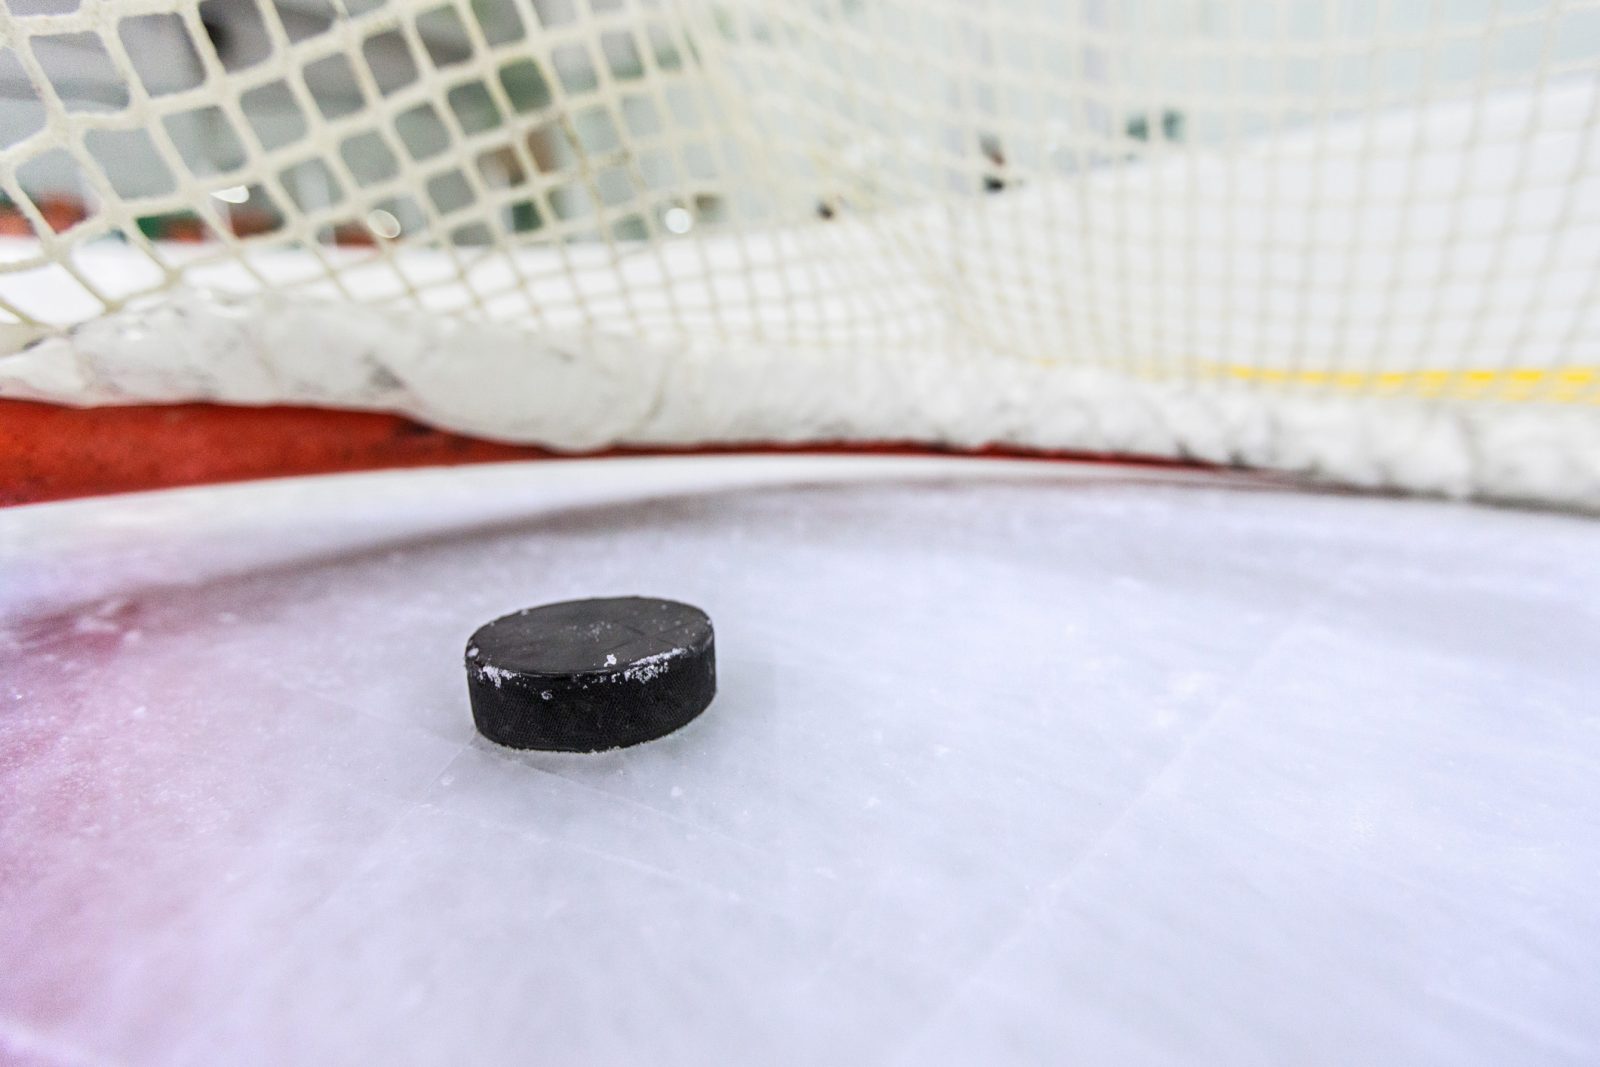 Hockey net with puck in goal.